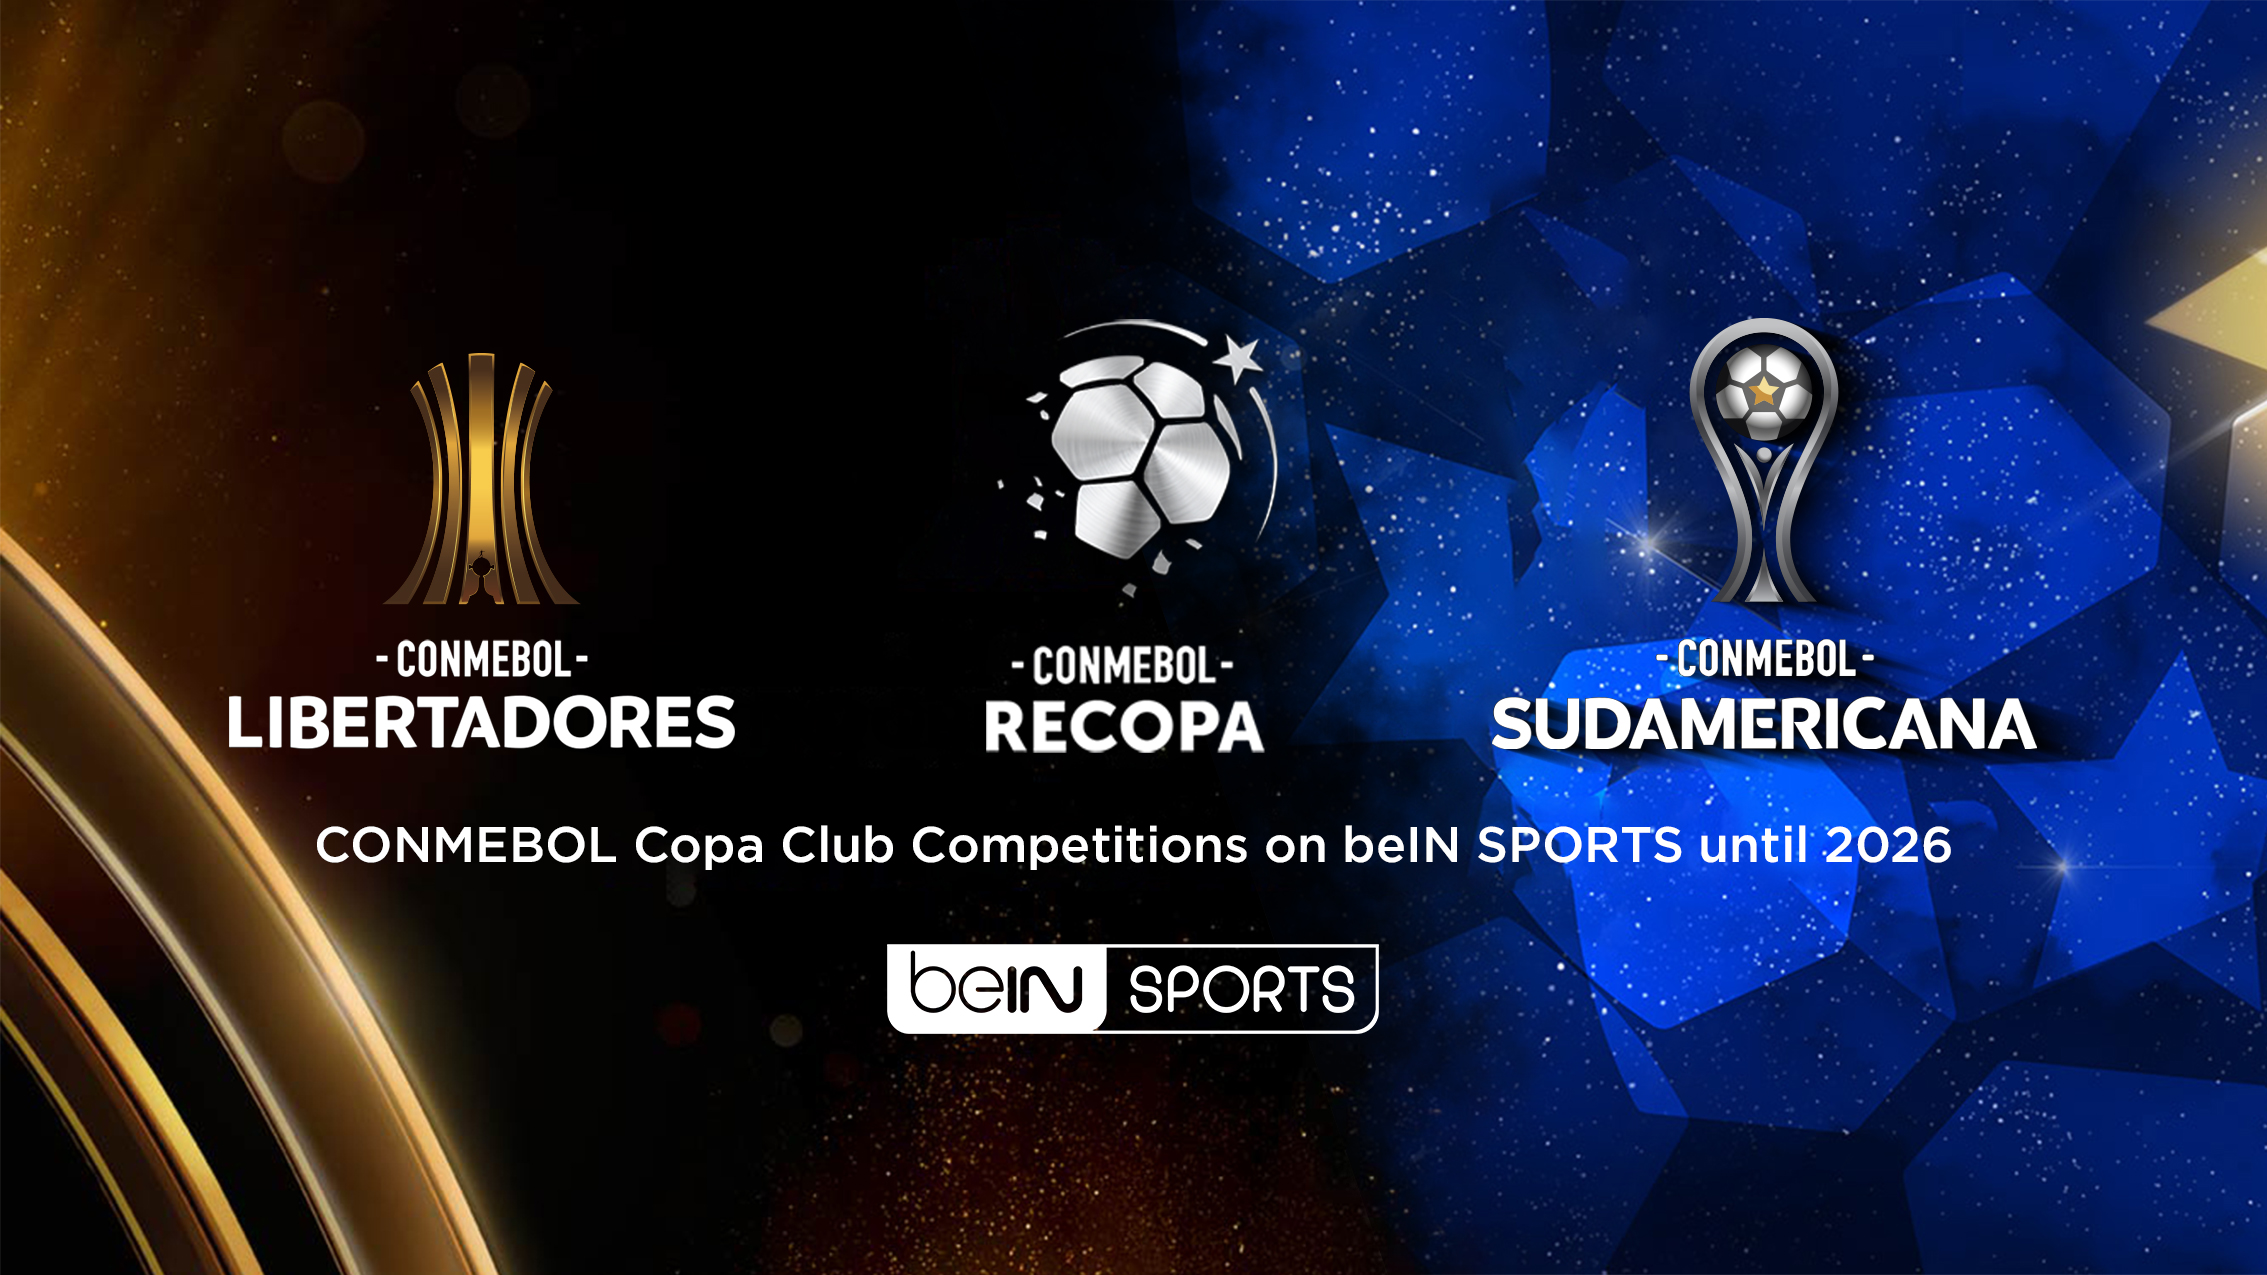 Football Fiesta! beIN Secures Exclusive Broadcast Rights for CONMEBOL  Libertadores, Sudamericana and Recopa from 2023-2026 Across MENA - beIN EN